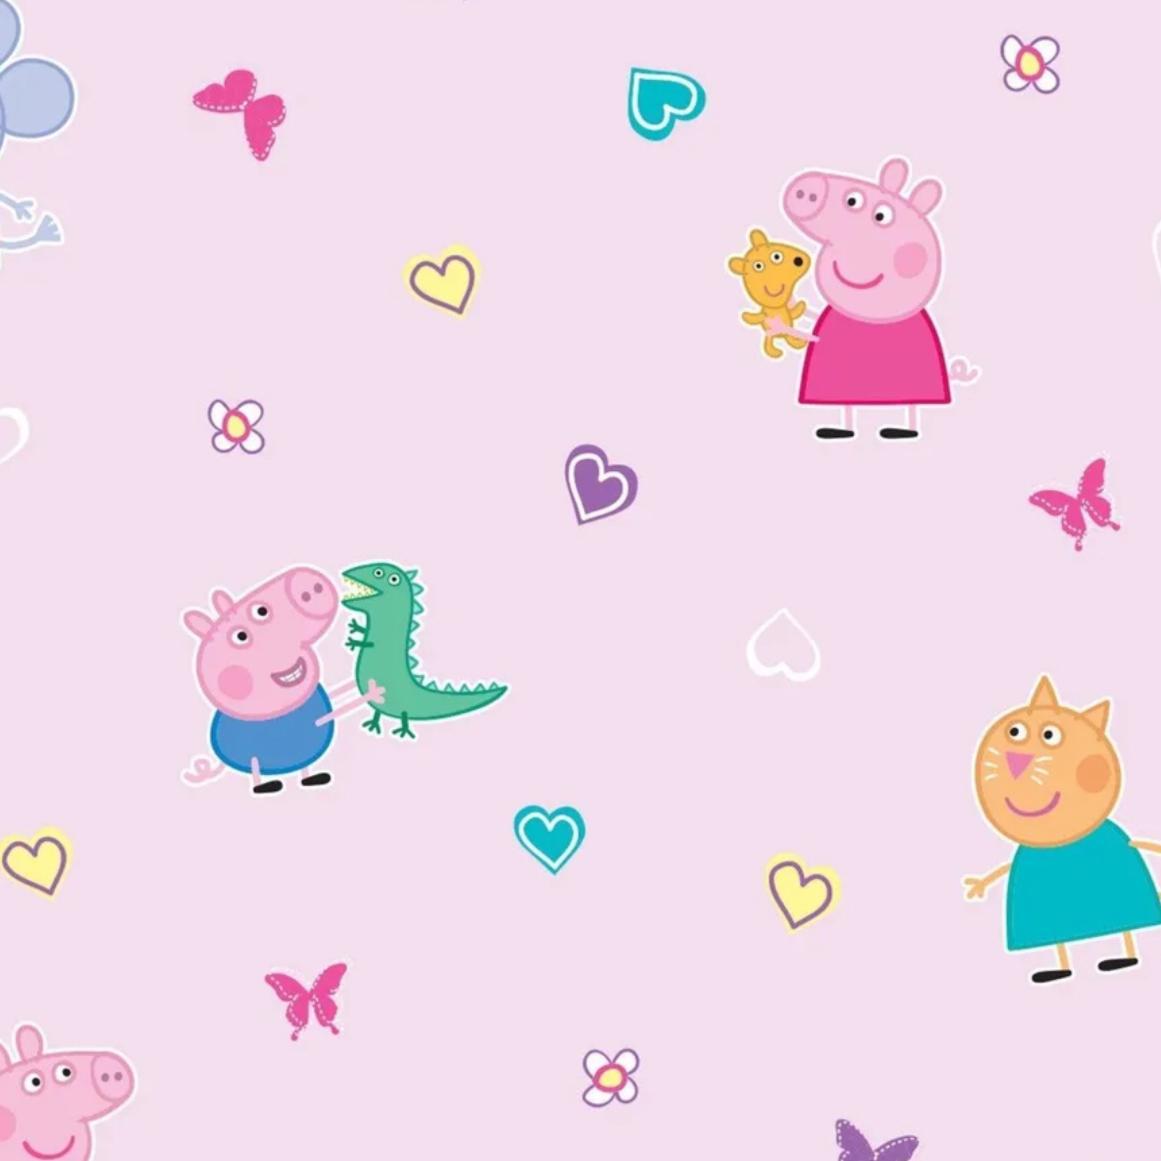 Peppa Pig's images